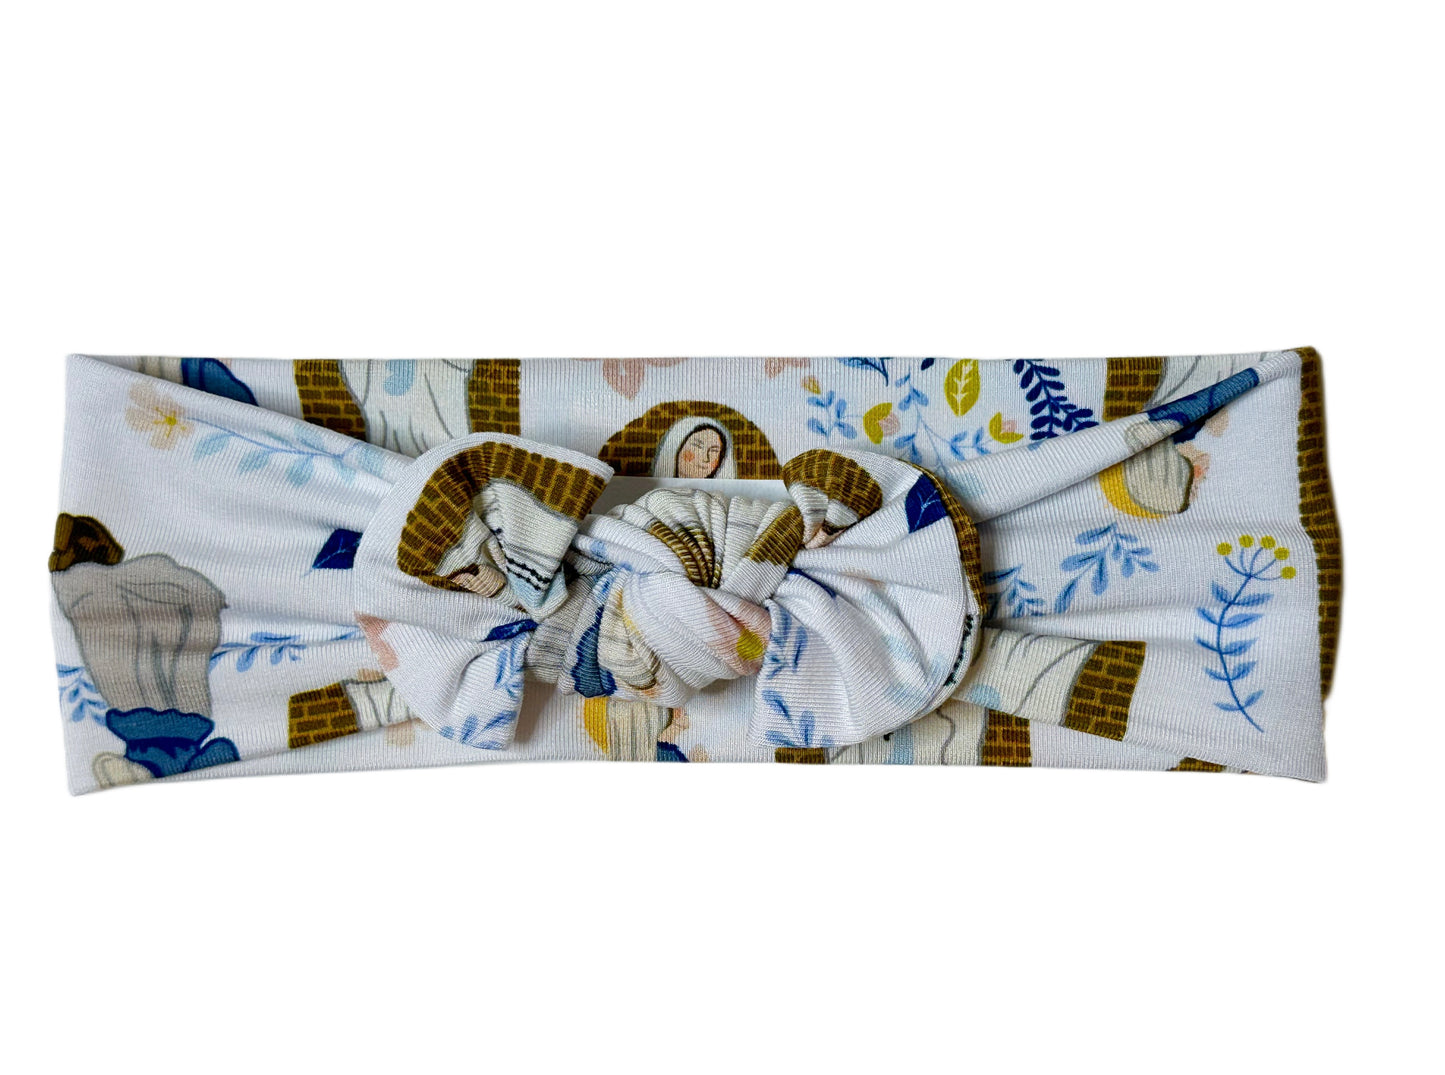 Our Lady of Lourdes knotted headband